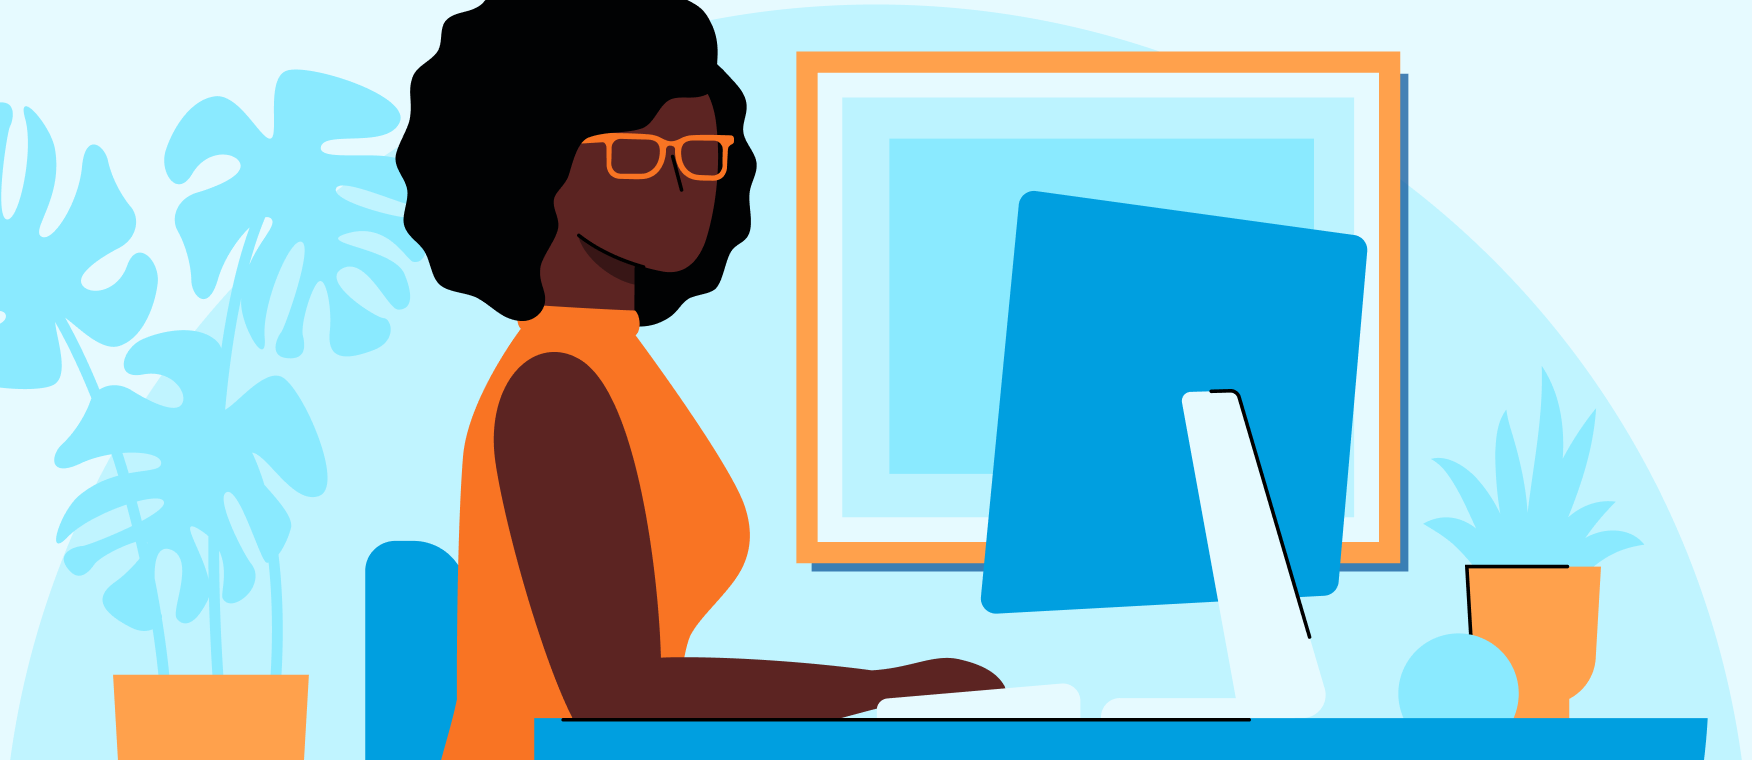 Illustrated image of a woman sitting in front of a monitor